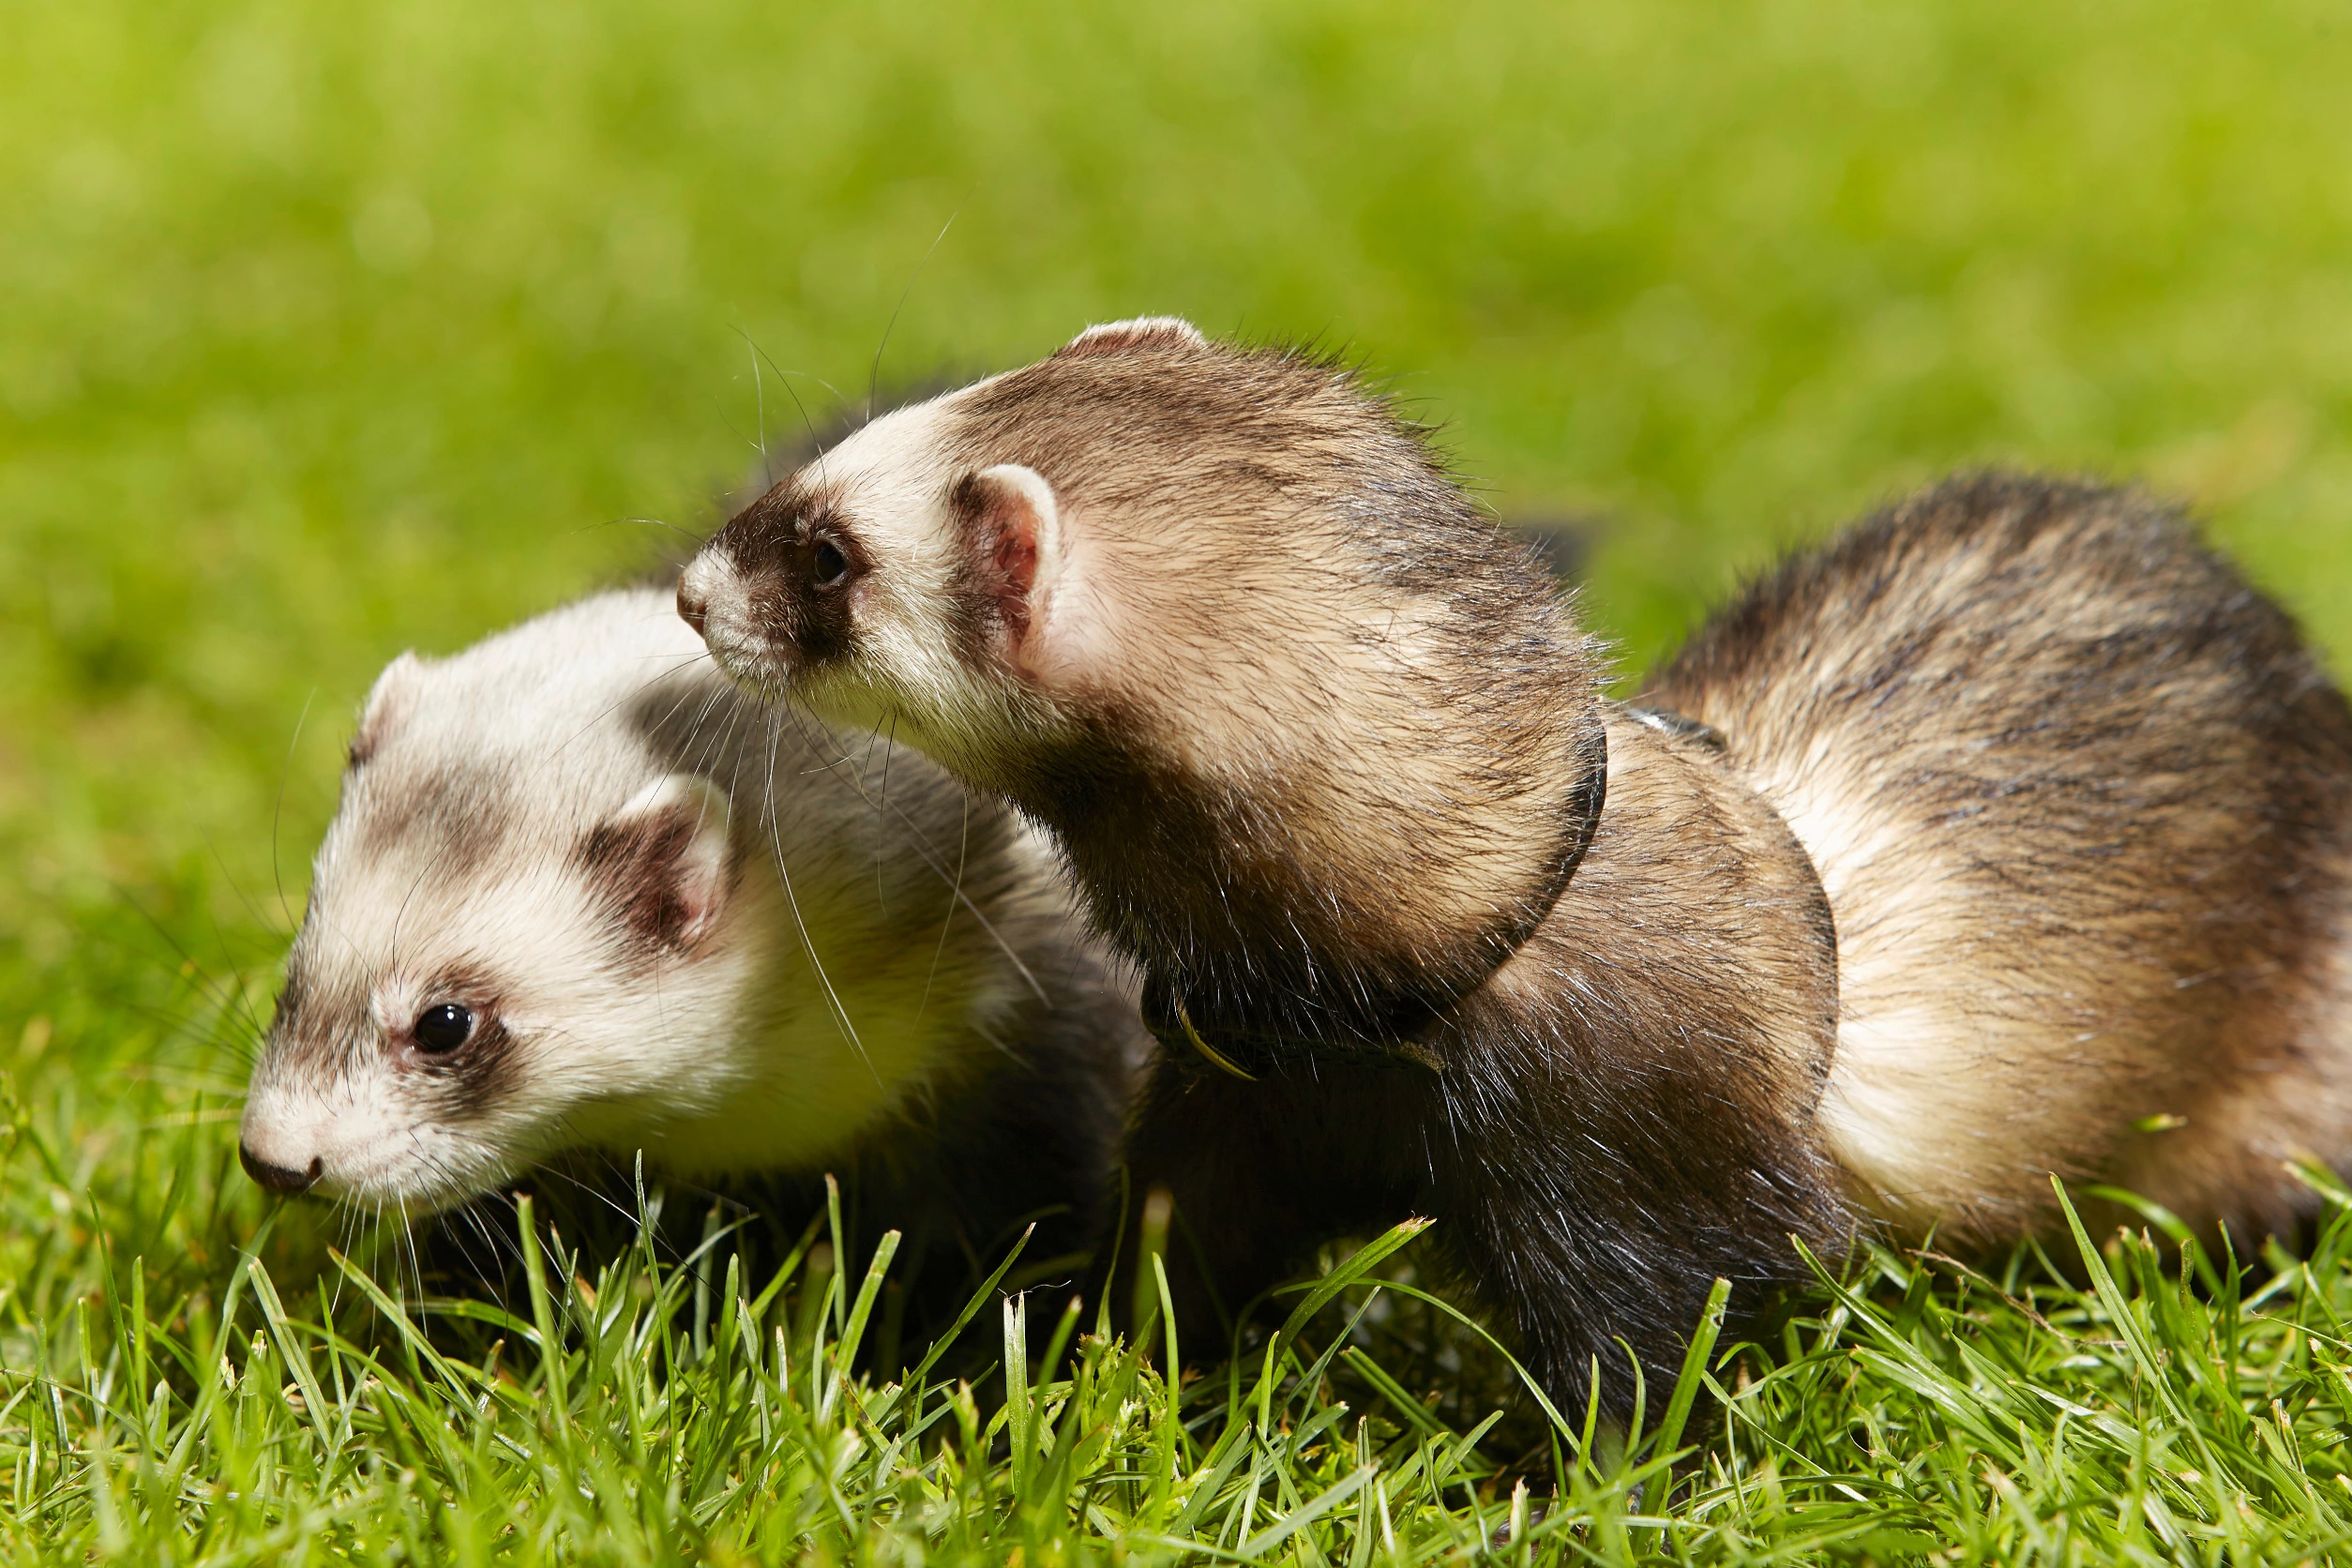 <p>Ferrets are lively and curious pets that can adapt well to apartment living with proper care and space management. While they are active and require regular playtime and mental stimulation, they can thrive in smaller living environments with adequate space for exploration and enrichment.</p> <p>Ferrets are known for their playful antics and can form strong bonds with their owners, providing endless entertainment and companionship.</p>